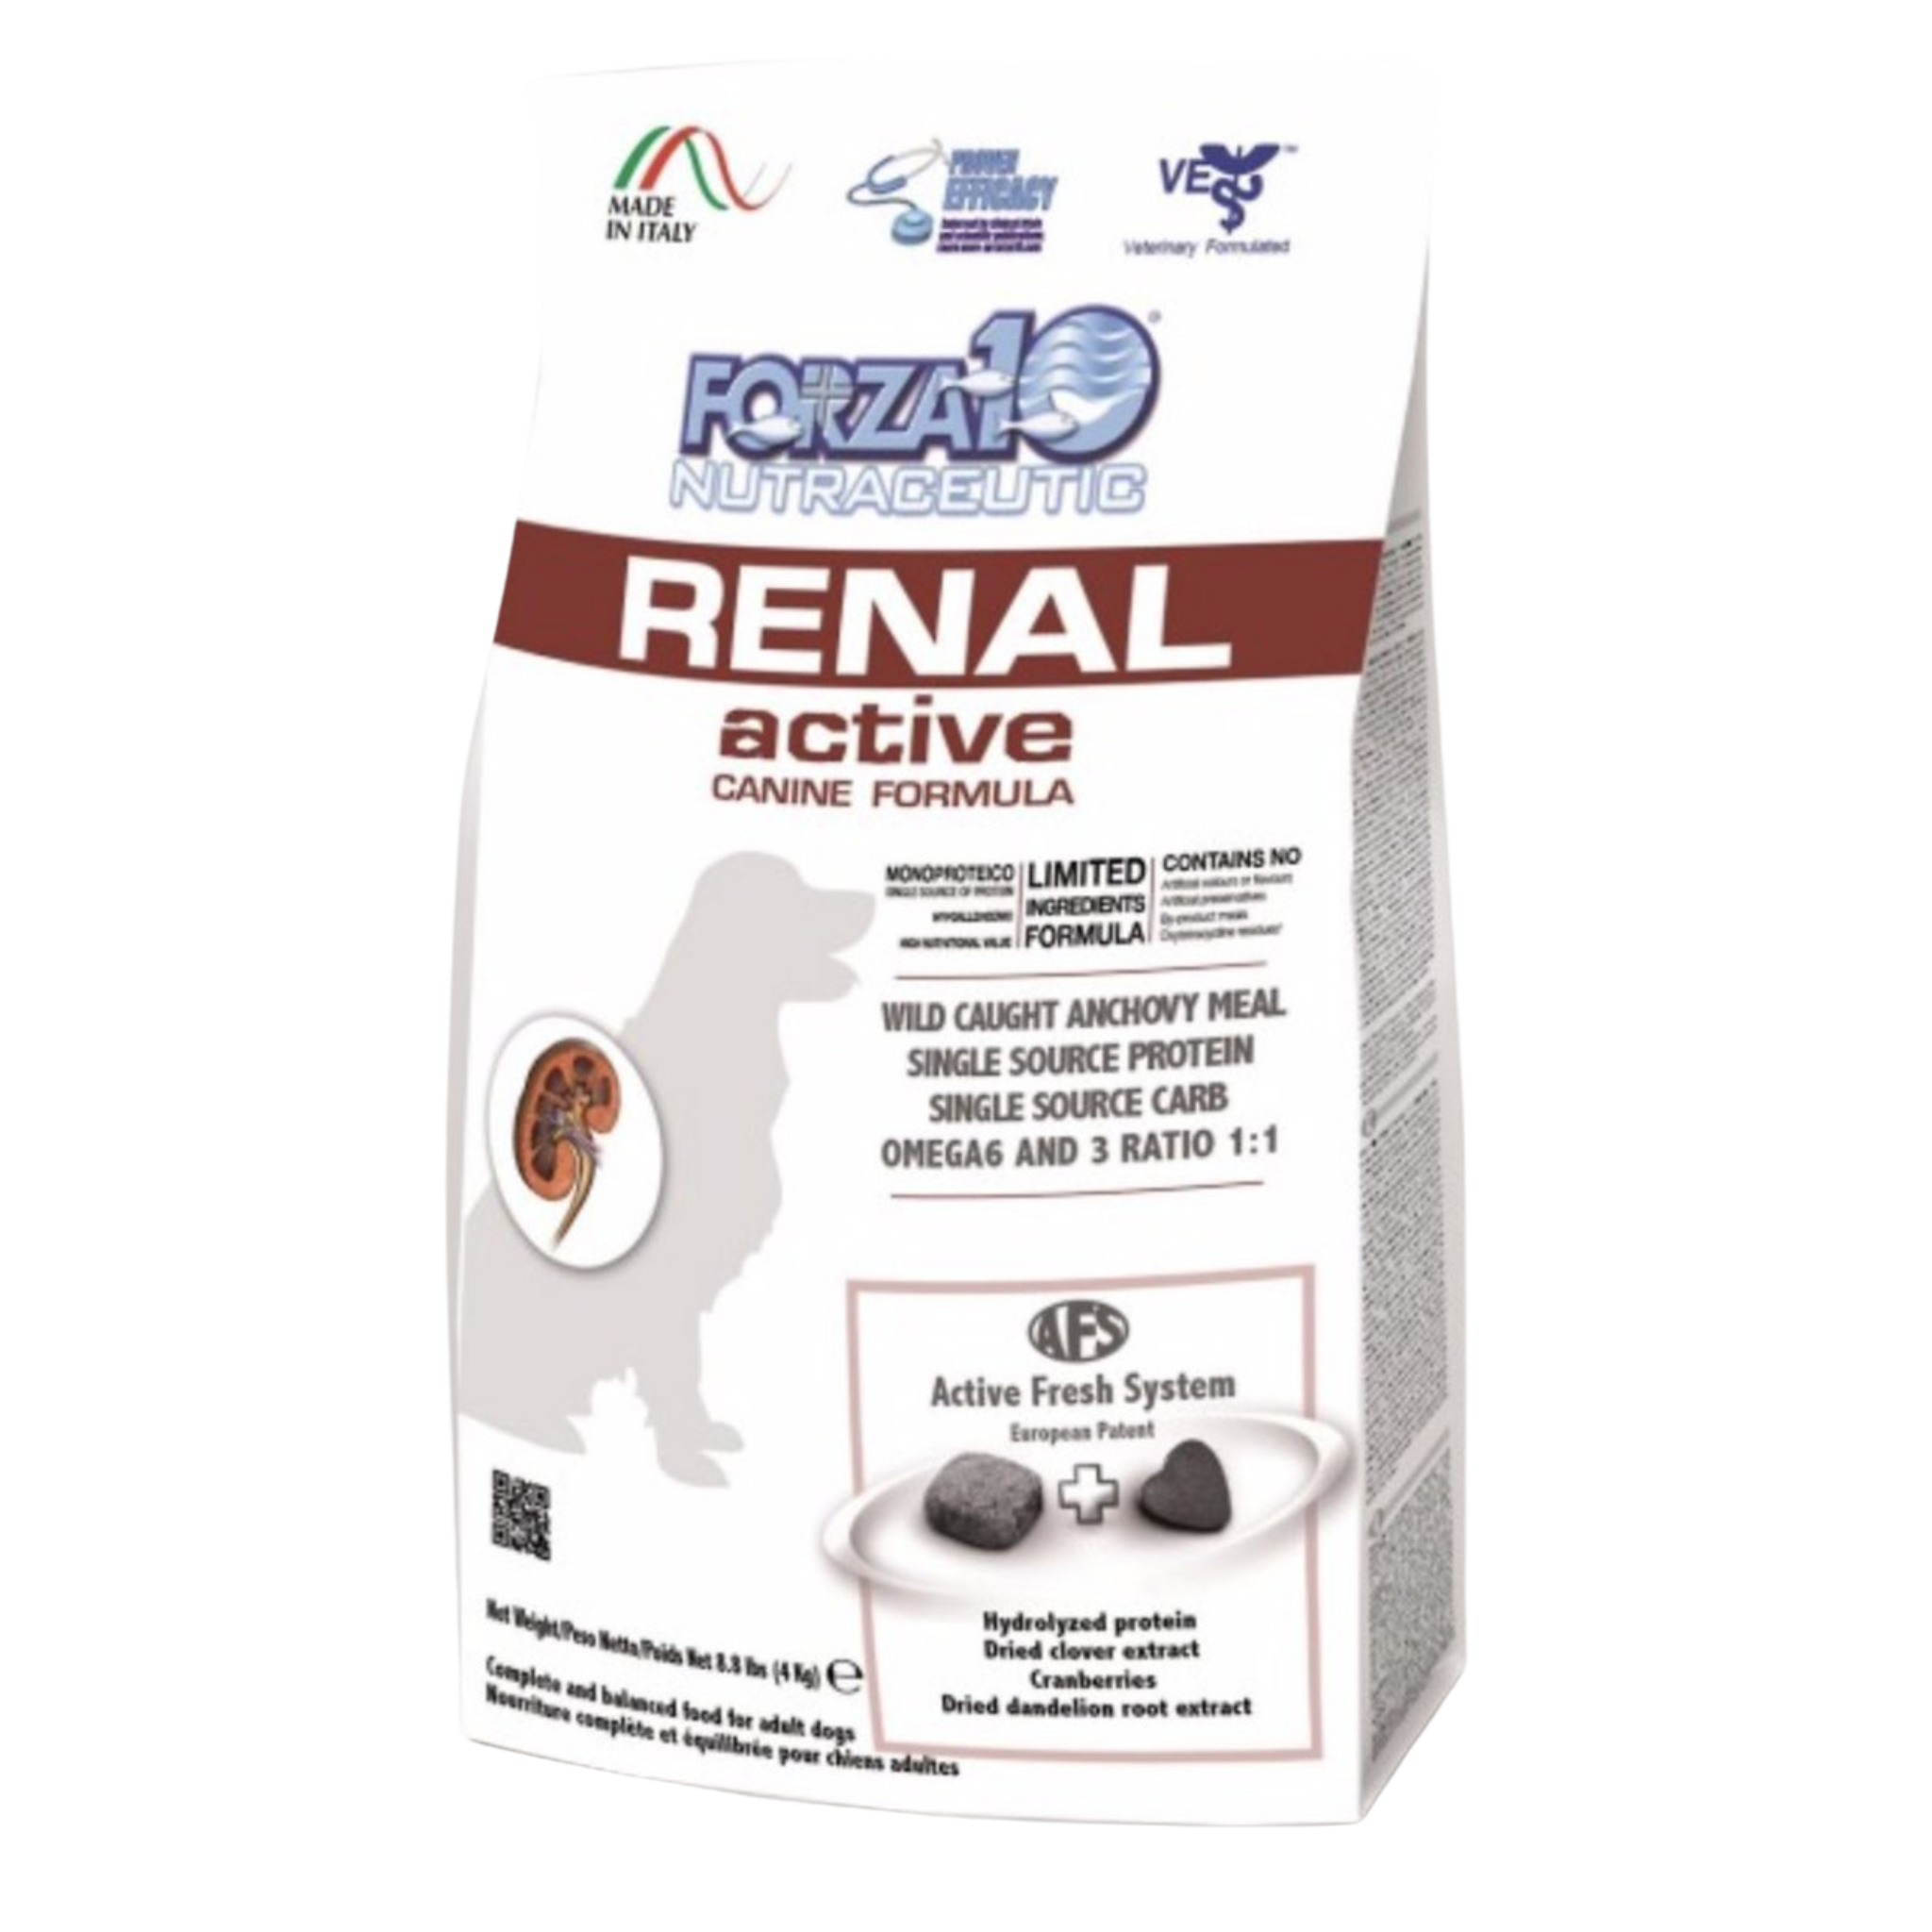 Forza10 Nutraceutic Active Kidney Renal Support Diet Dry Dog Food, 8.8-lb bag - Mutts & Co.